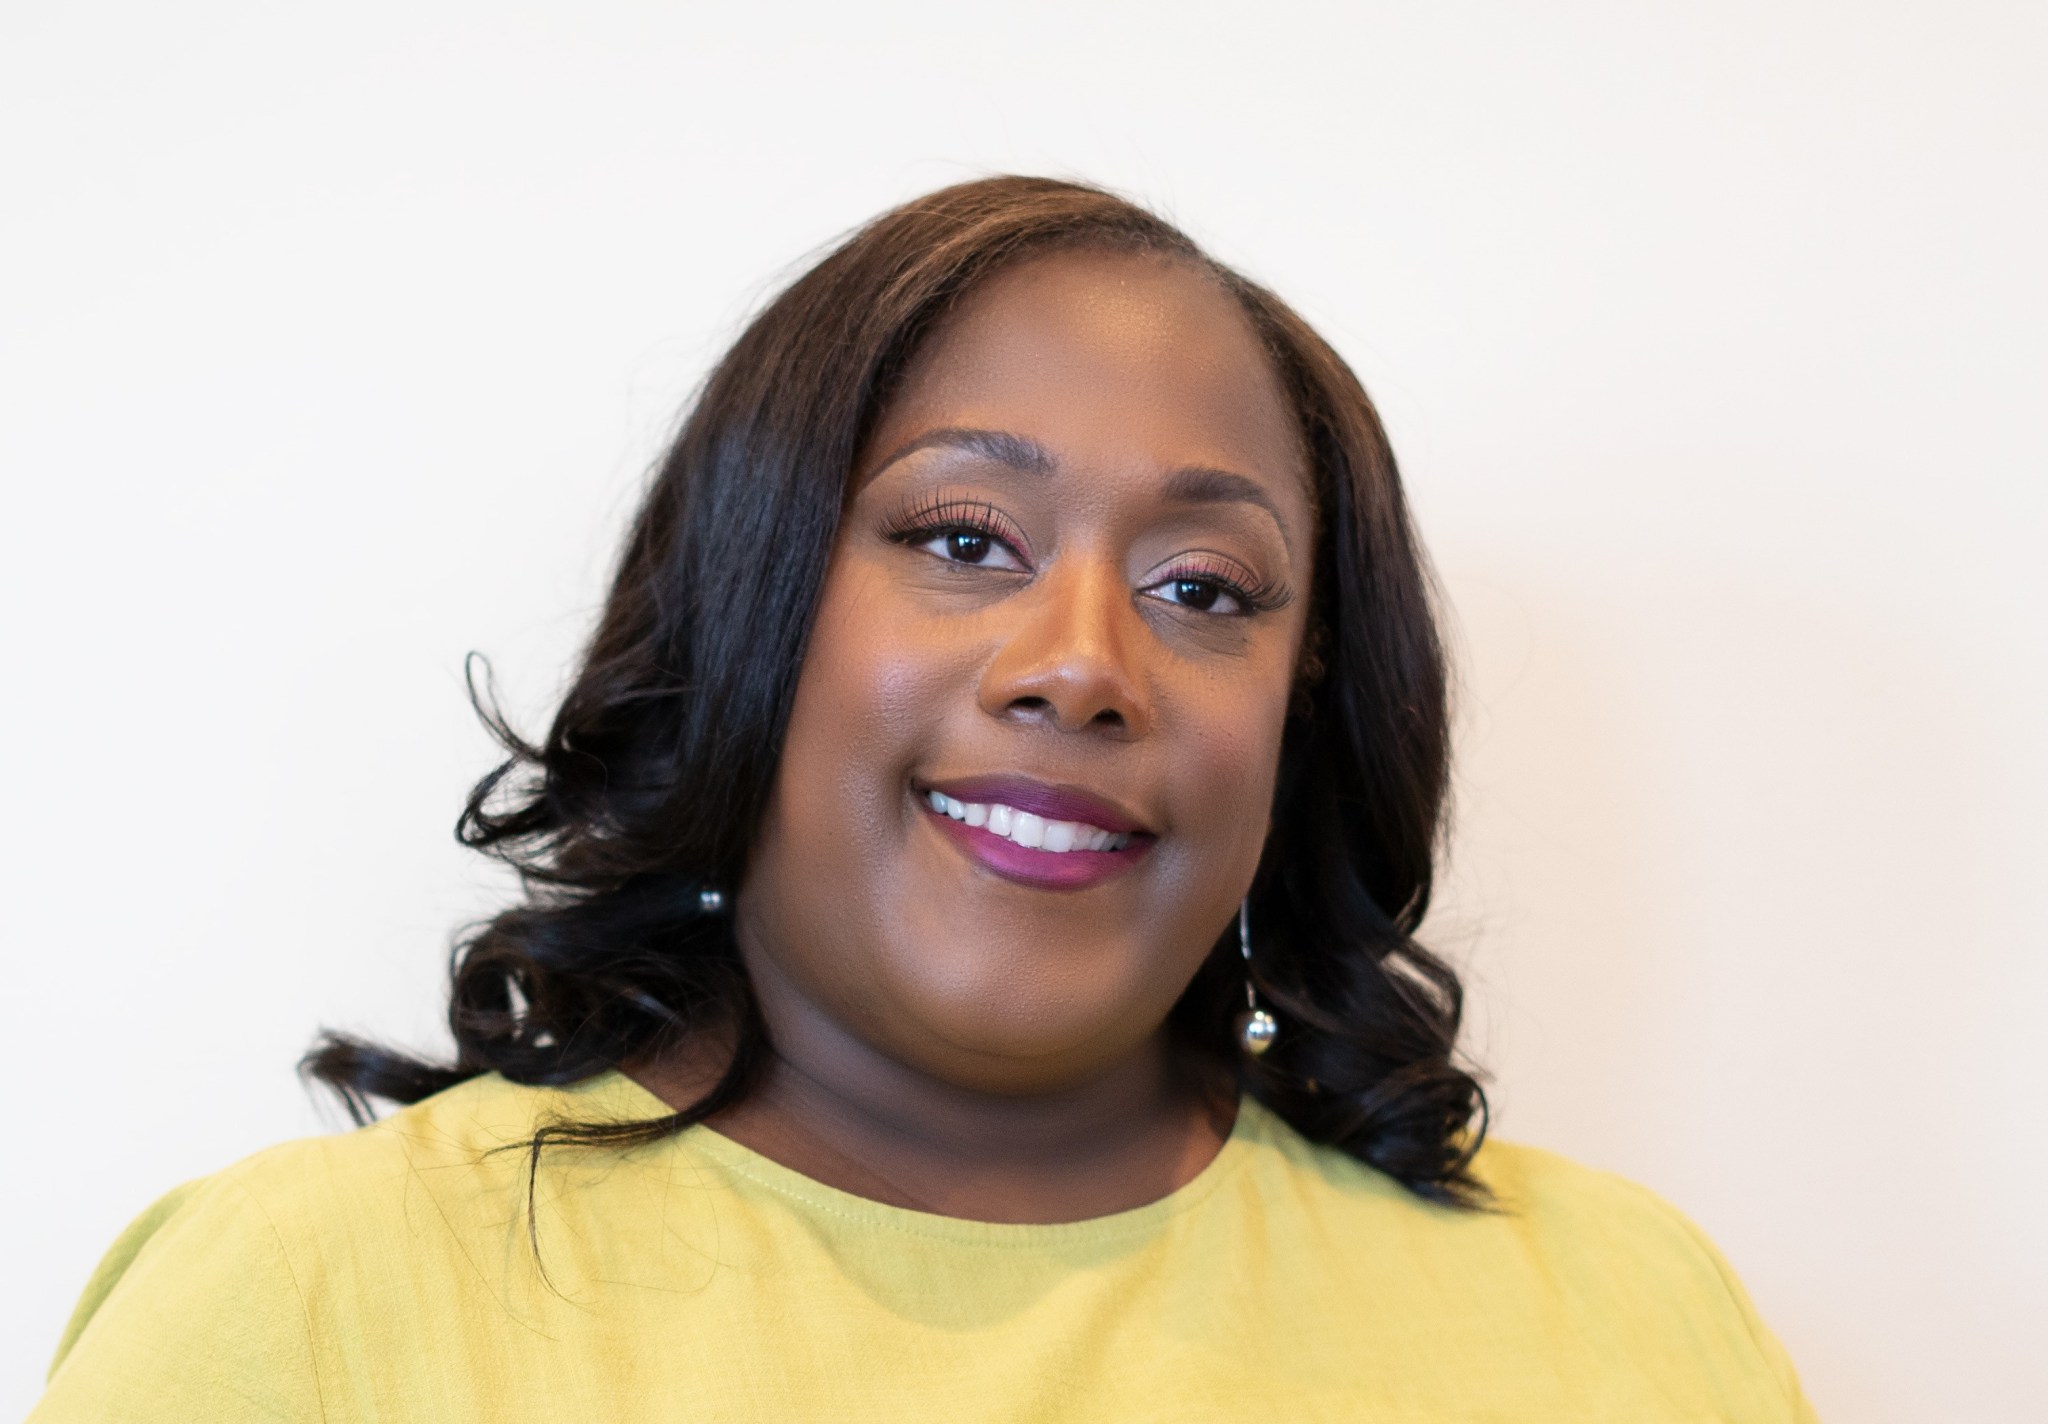 headshot of Michelle Jones, she is wearing a yellow shirt against a white background